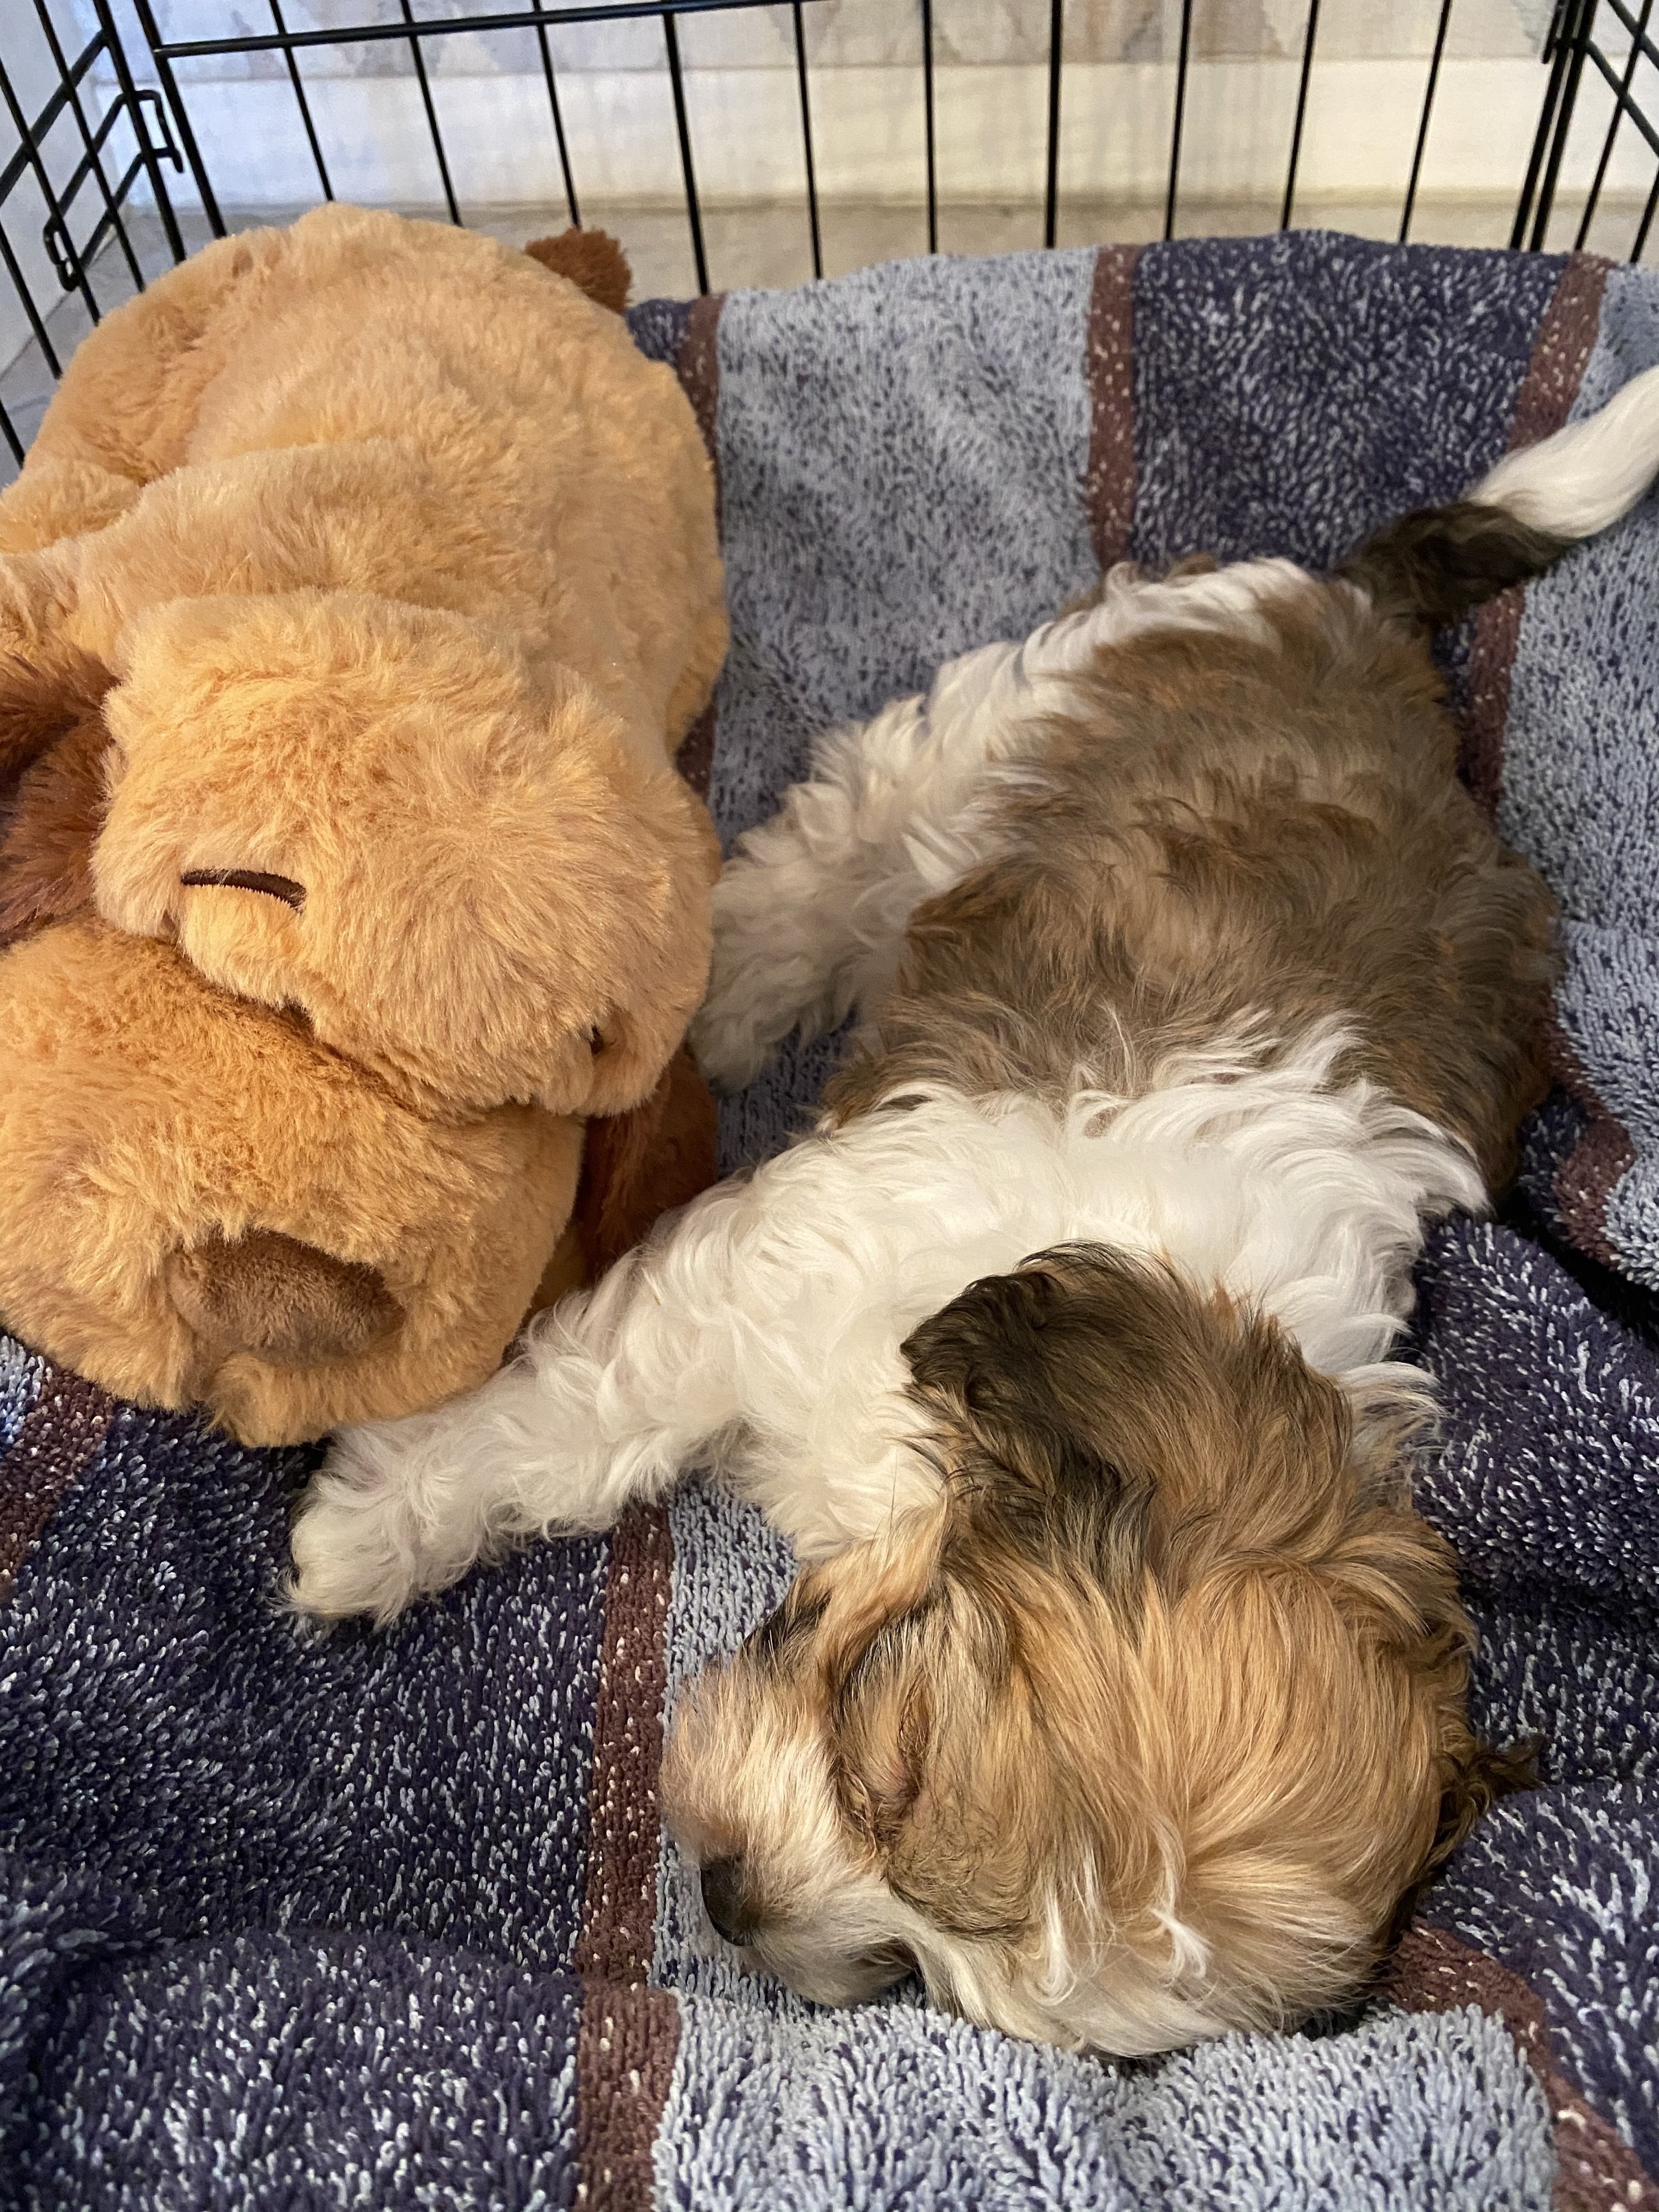 puppy snuggling with stuffed animal 